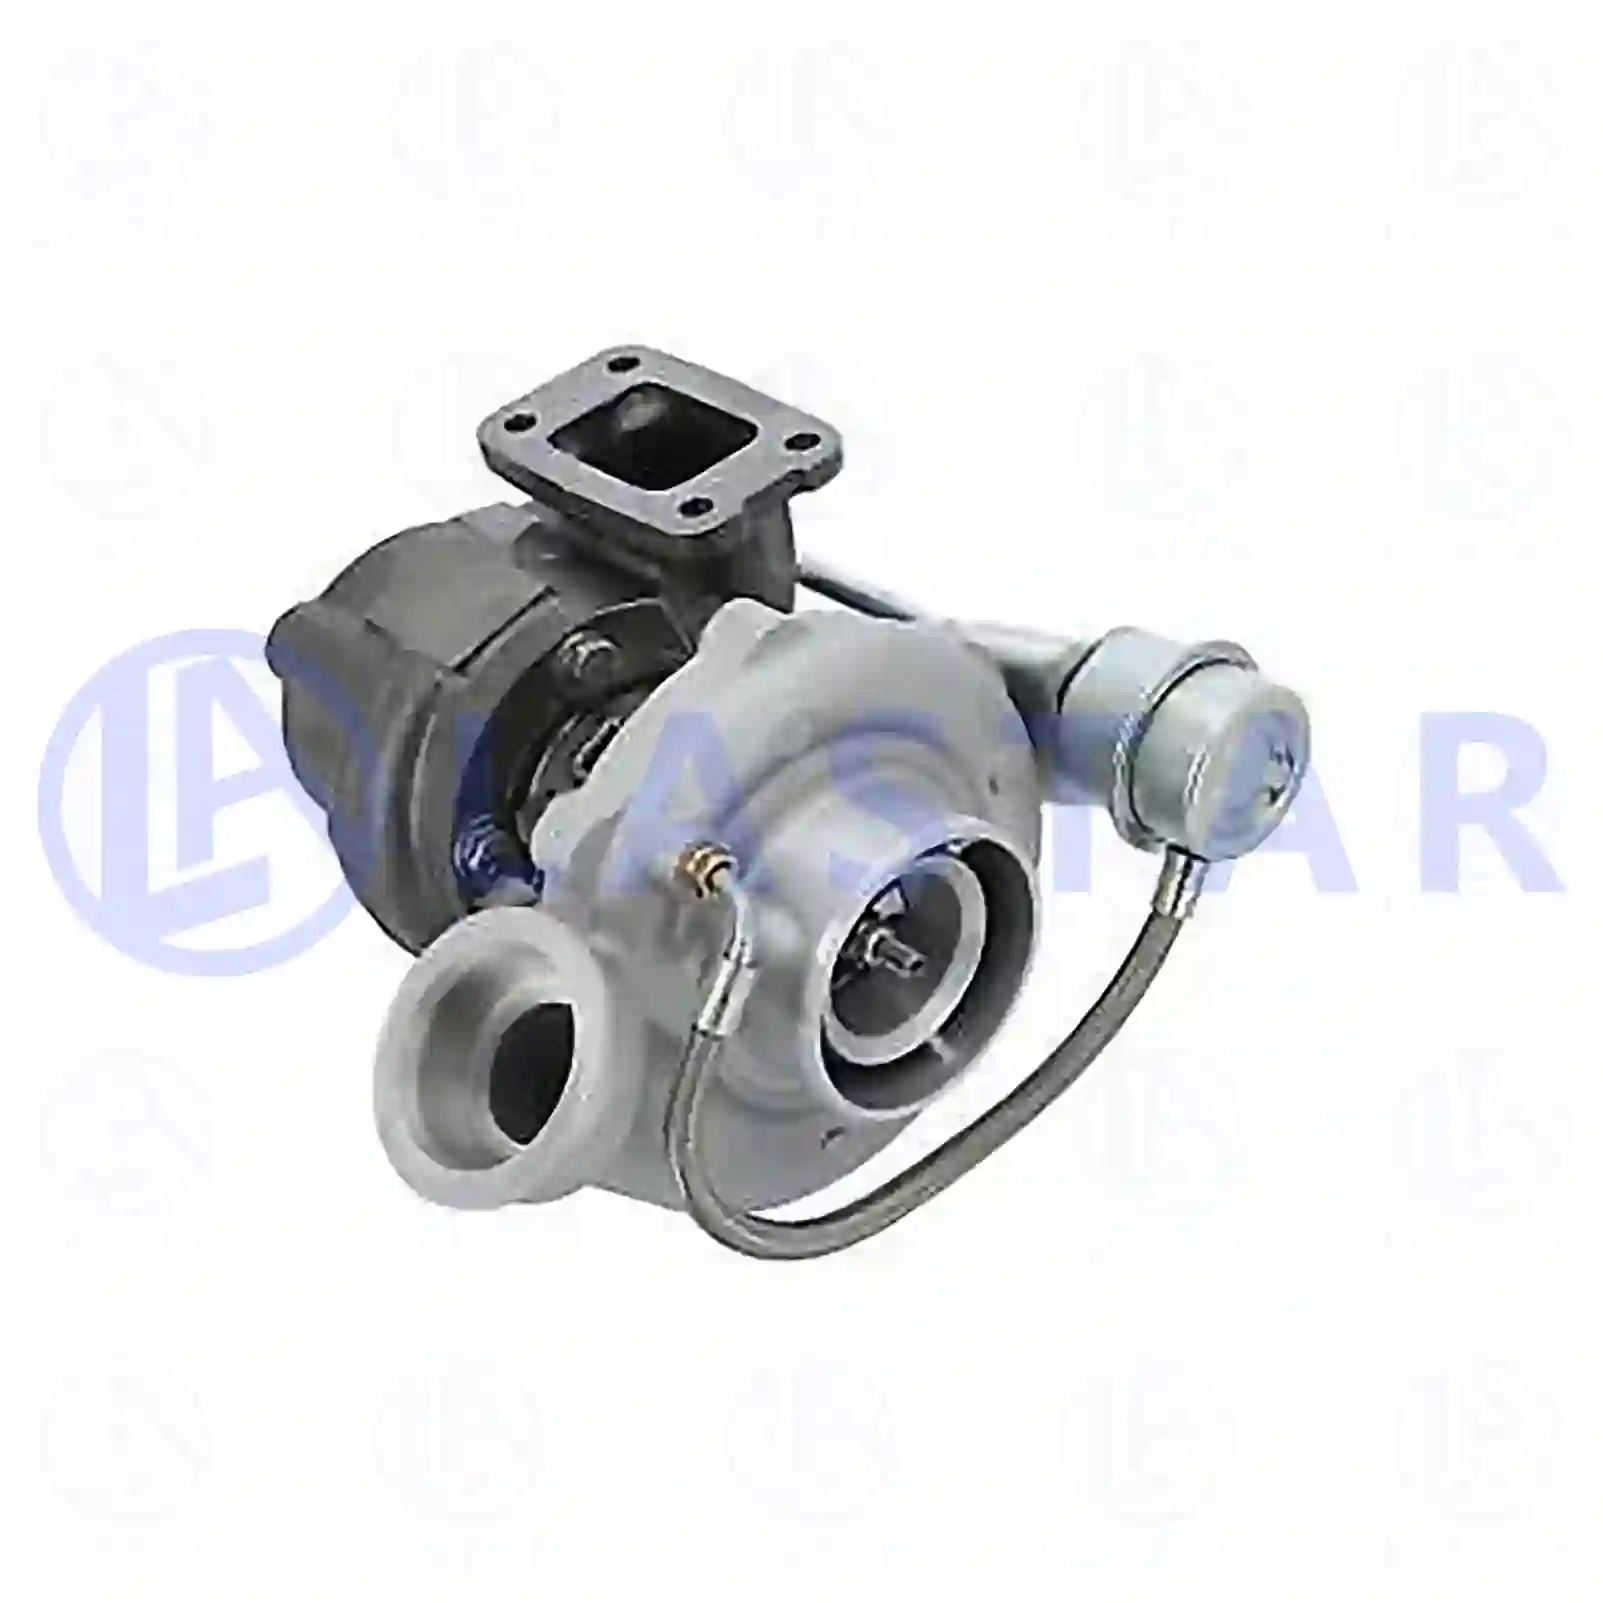 Turbocharger, with gasket kit, 77700430, 5010553448 ||  77700430 Lastar Spare Part | Truck Spare Parts, Auotomotive Spare Parts Turbocharger, with gasket kit, 77700430, 5010553448 ||  77700430 Lastar Spare Part | Truck Spare Parts, Auotomotive Spare Parts